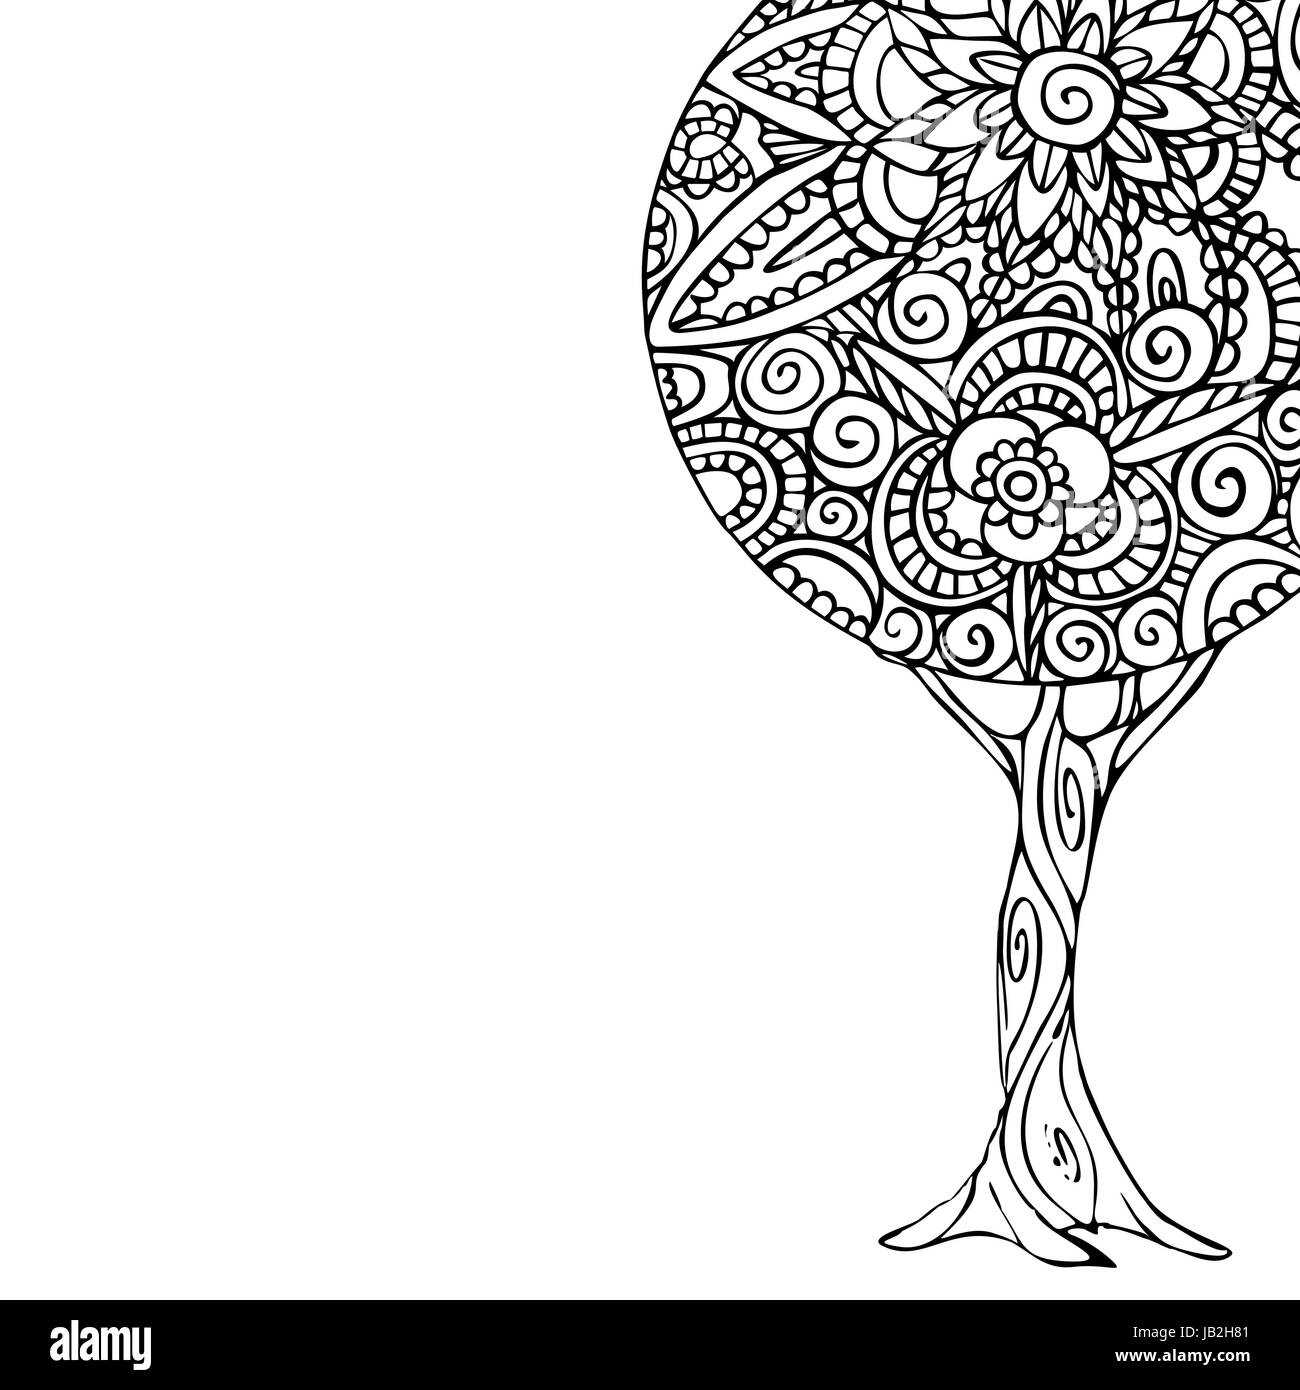 Tree illustration with black and white mandala design, hand drawn floral decoration in traditional ethnic style. EPS10 vector. Stock Vector